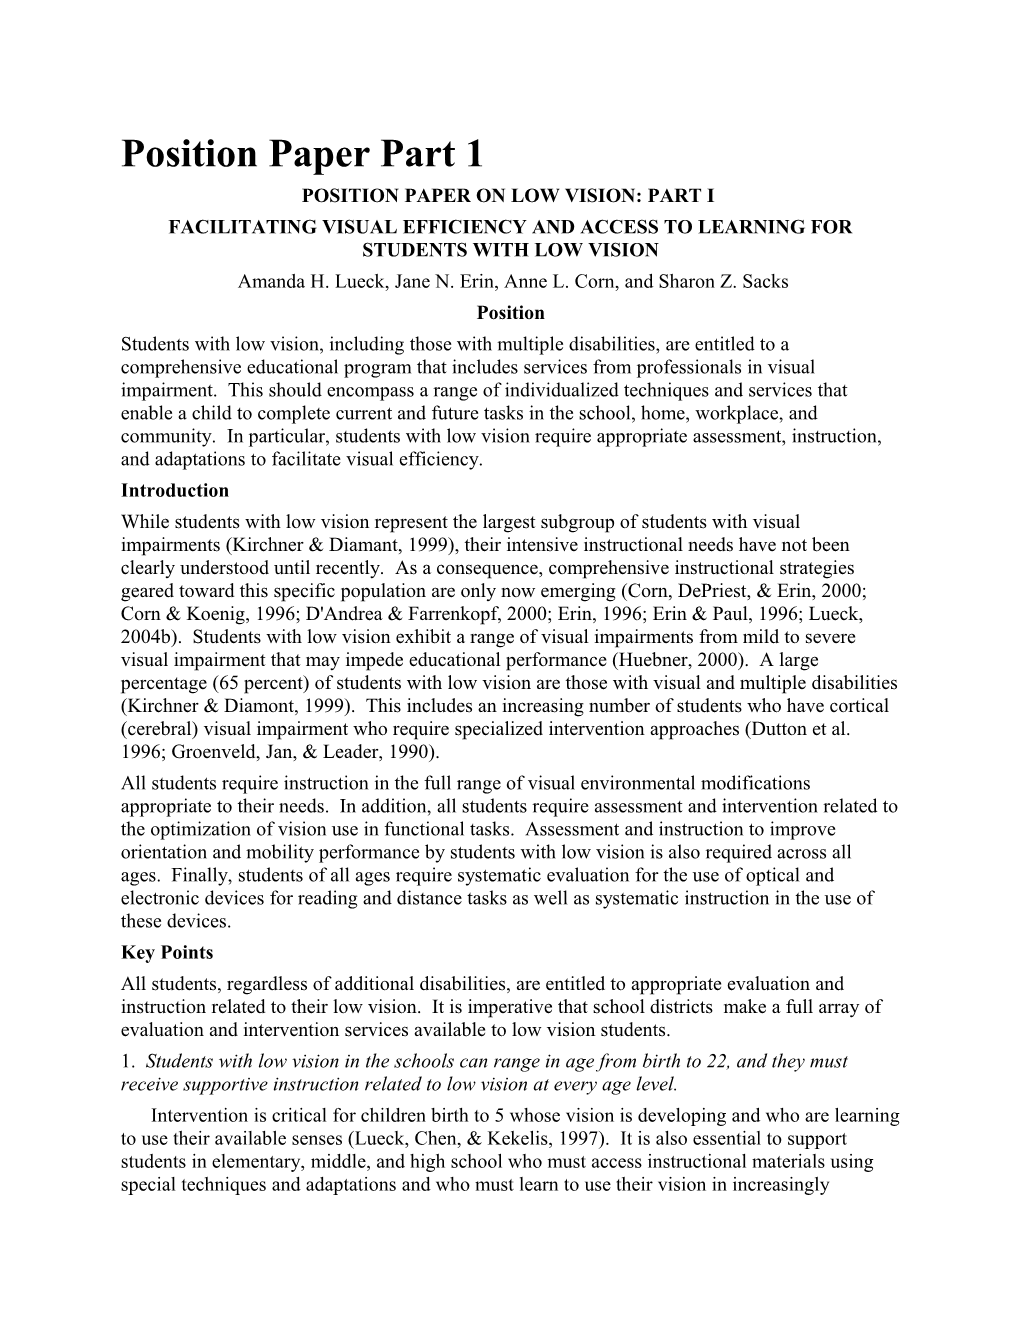 Position Paper on Low Vision: Part I